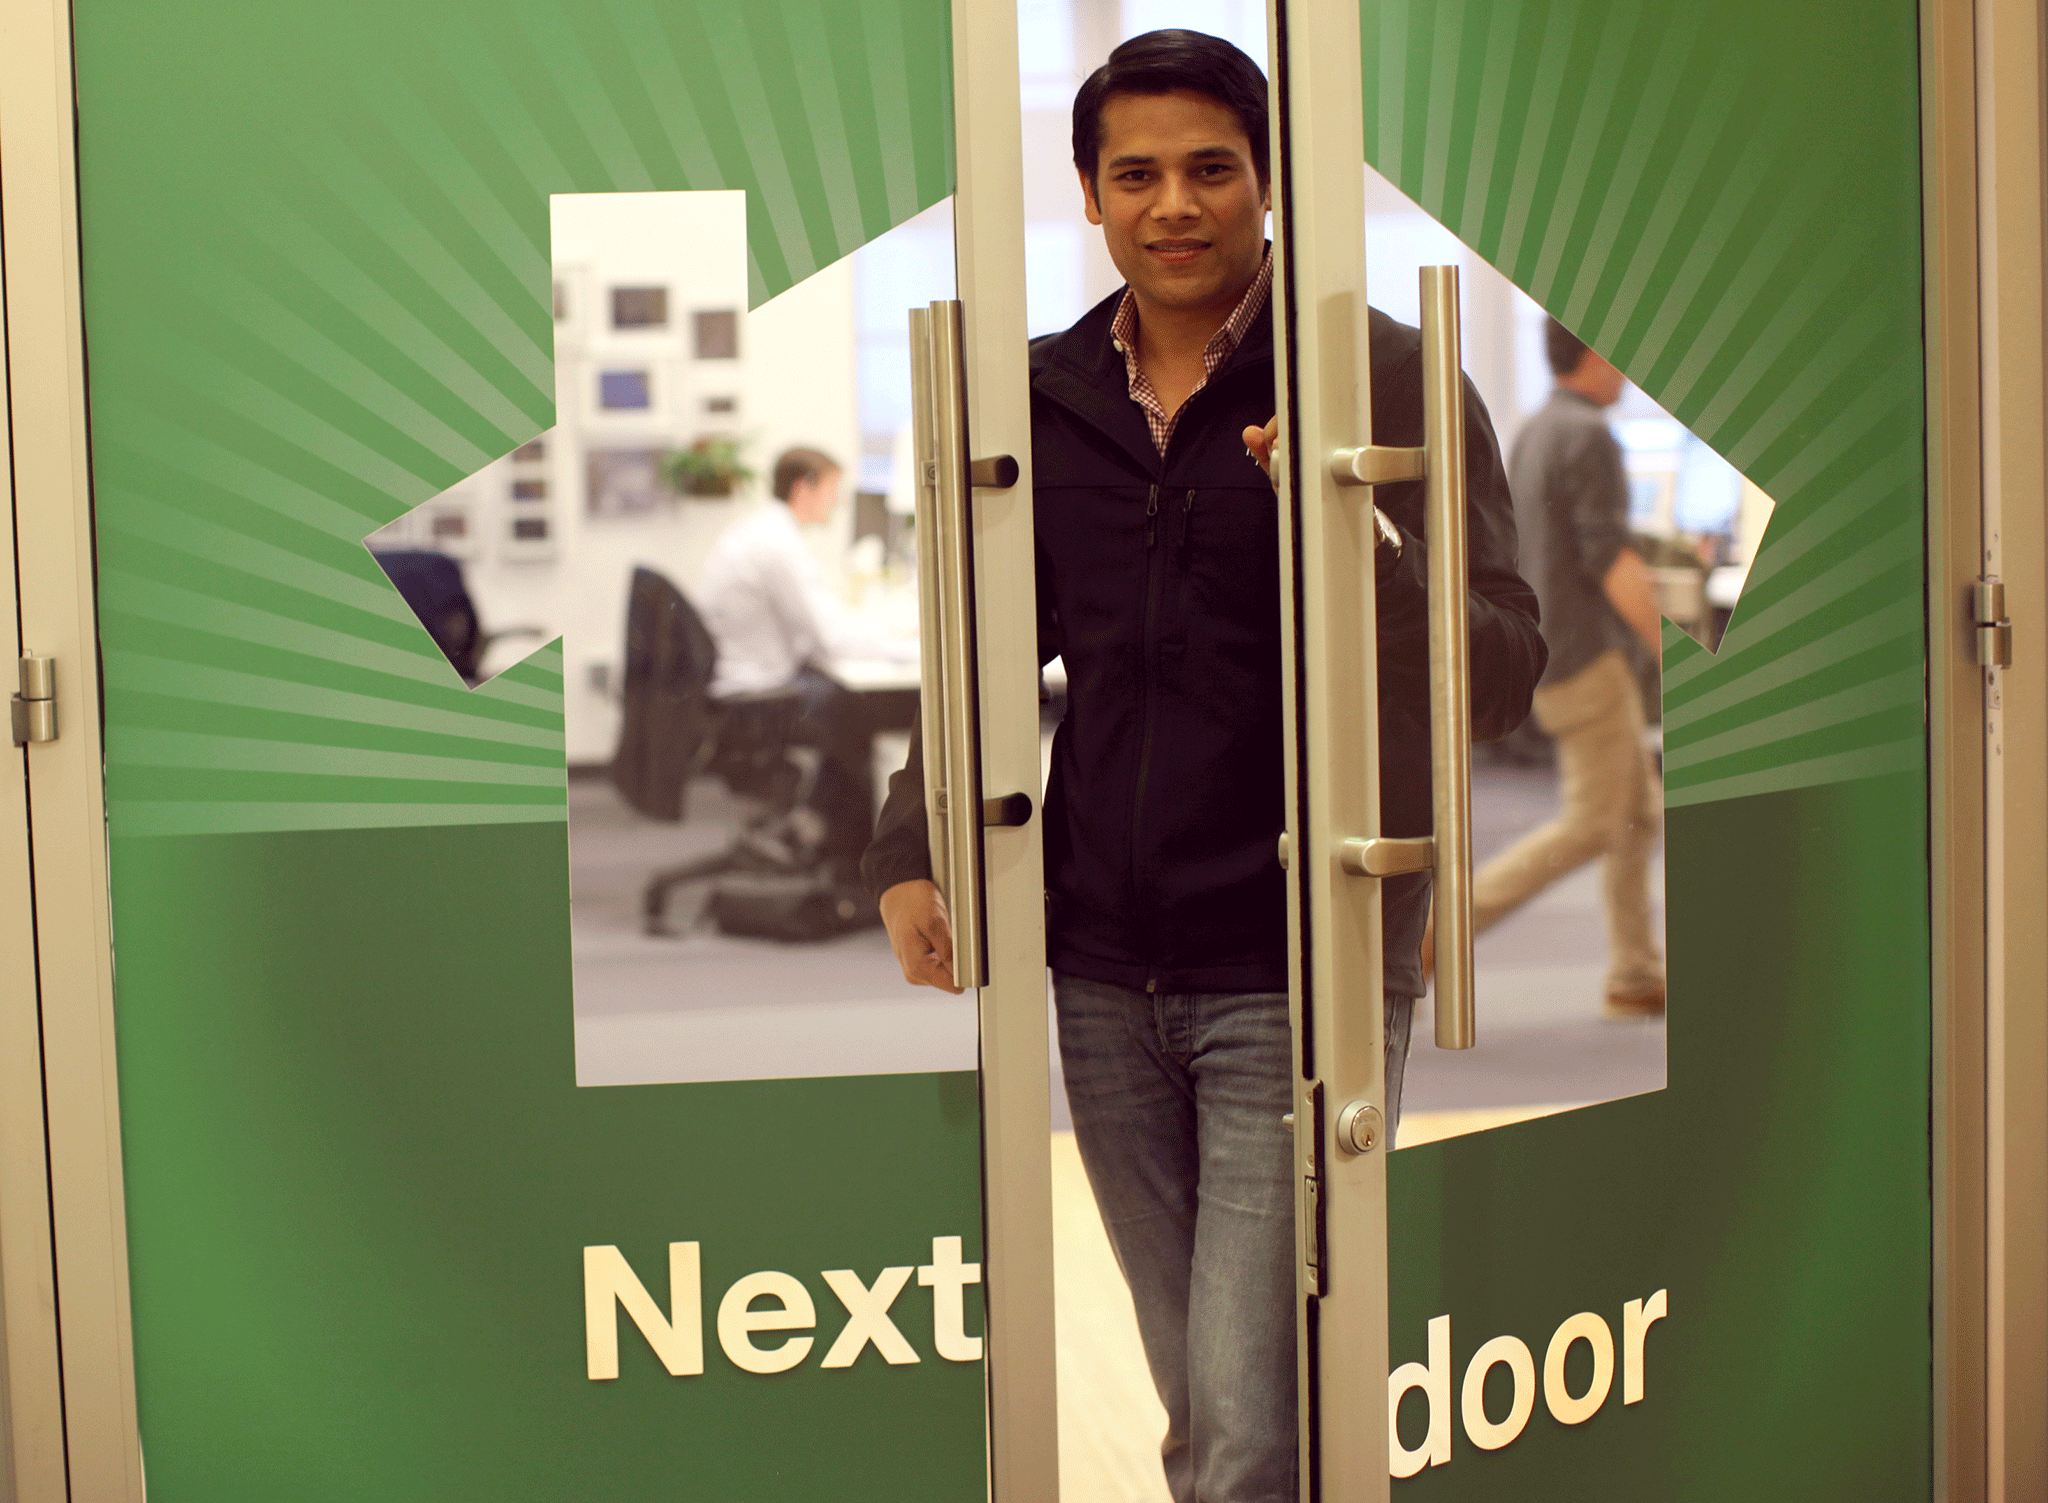 Nextdoor has raised over $210m (£166m) in funding from top-tier Silicon Valley venture capitalists, with its last financing round in 2015 valuing the company at more than $1bn